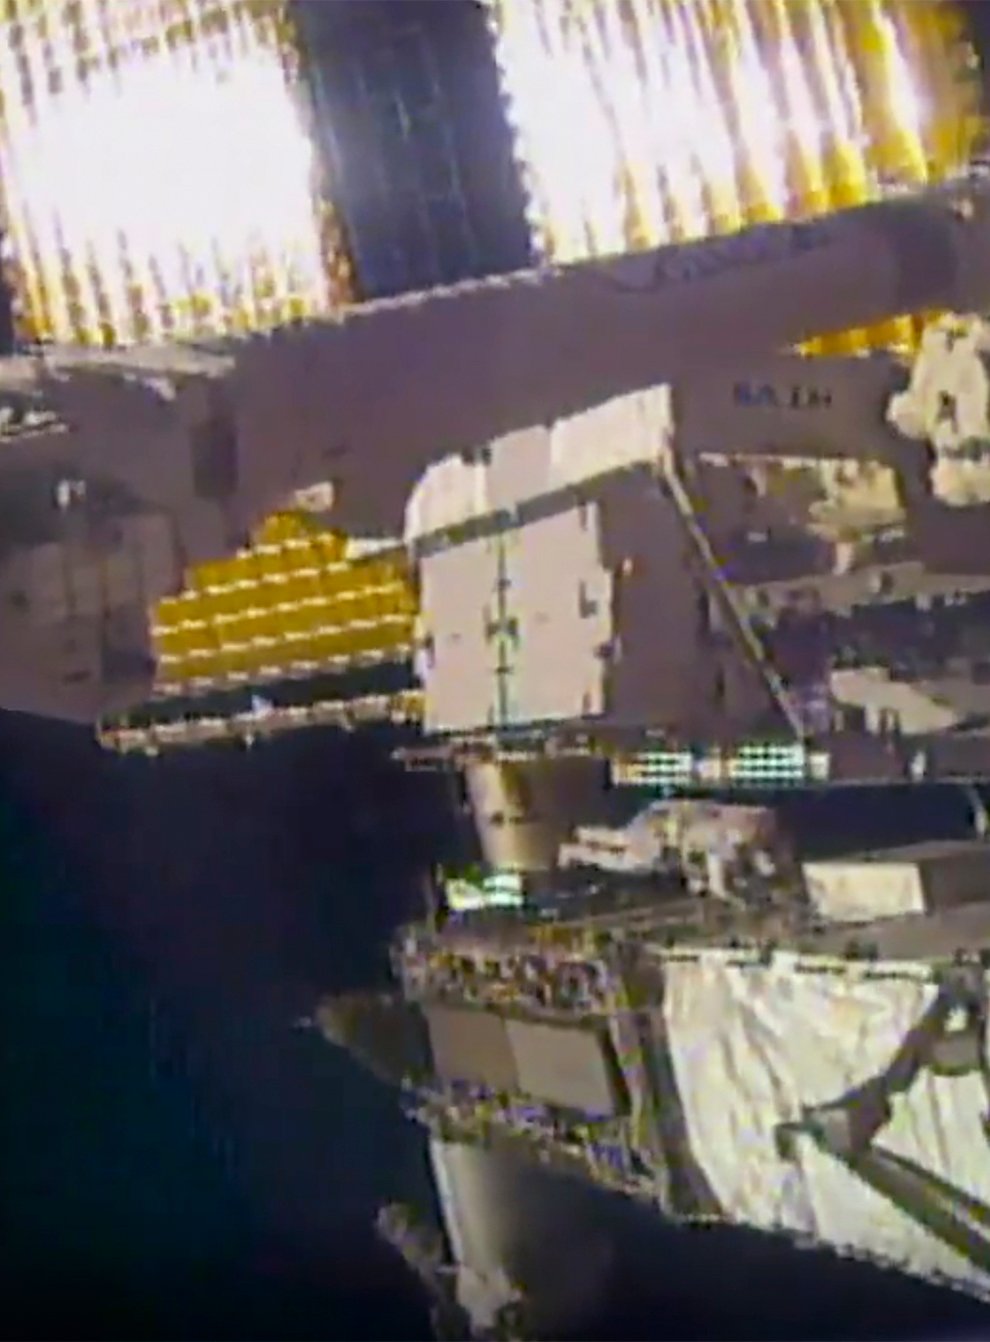 Commander Chris Cassidy lost a mirror during a spacewalk from the International Space Station